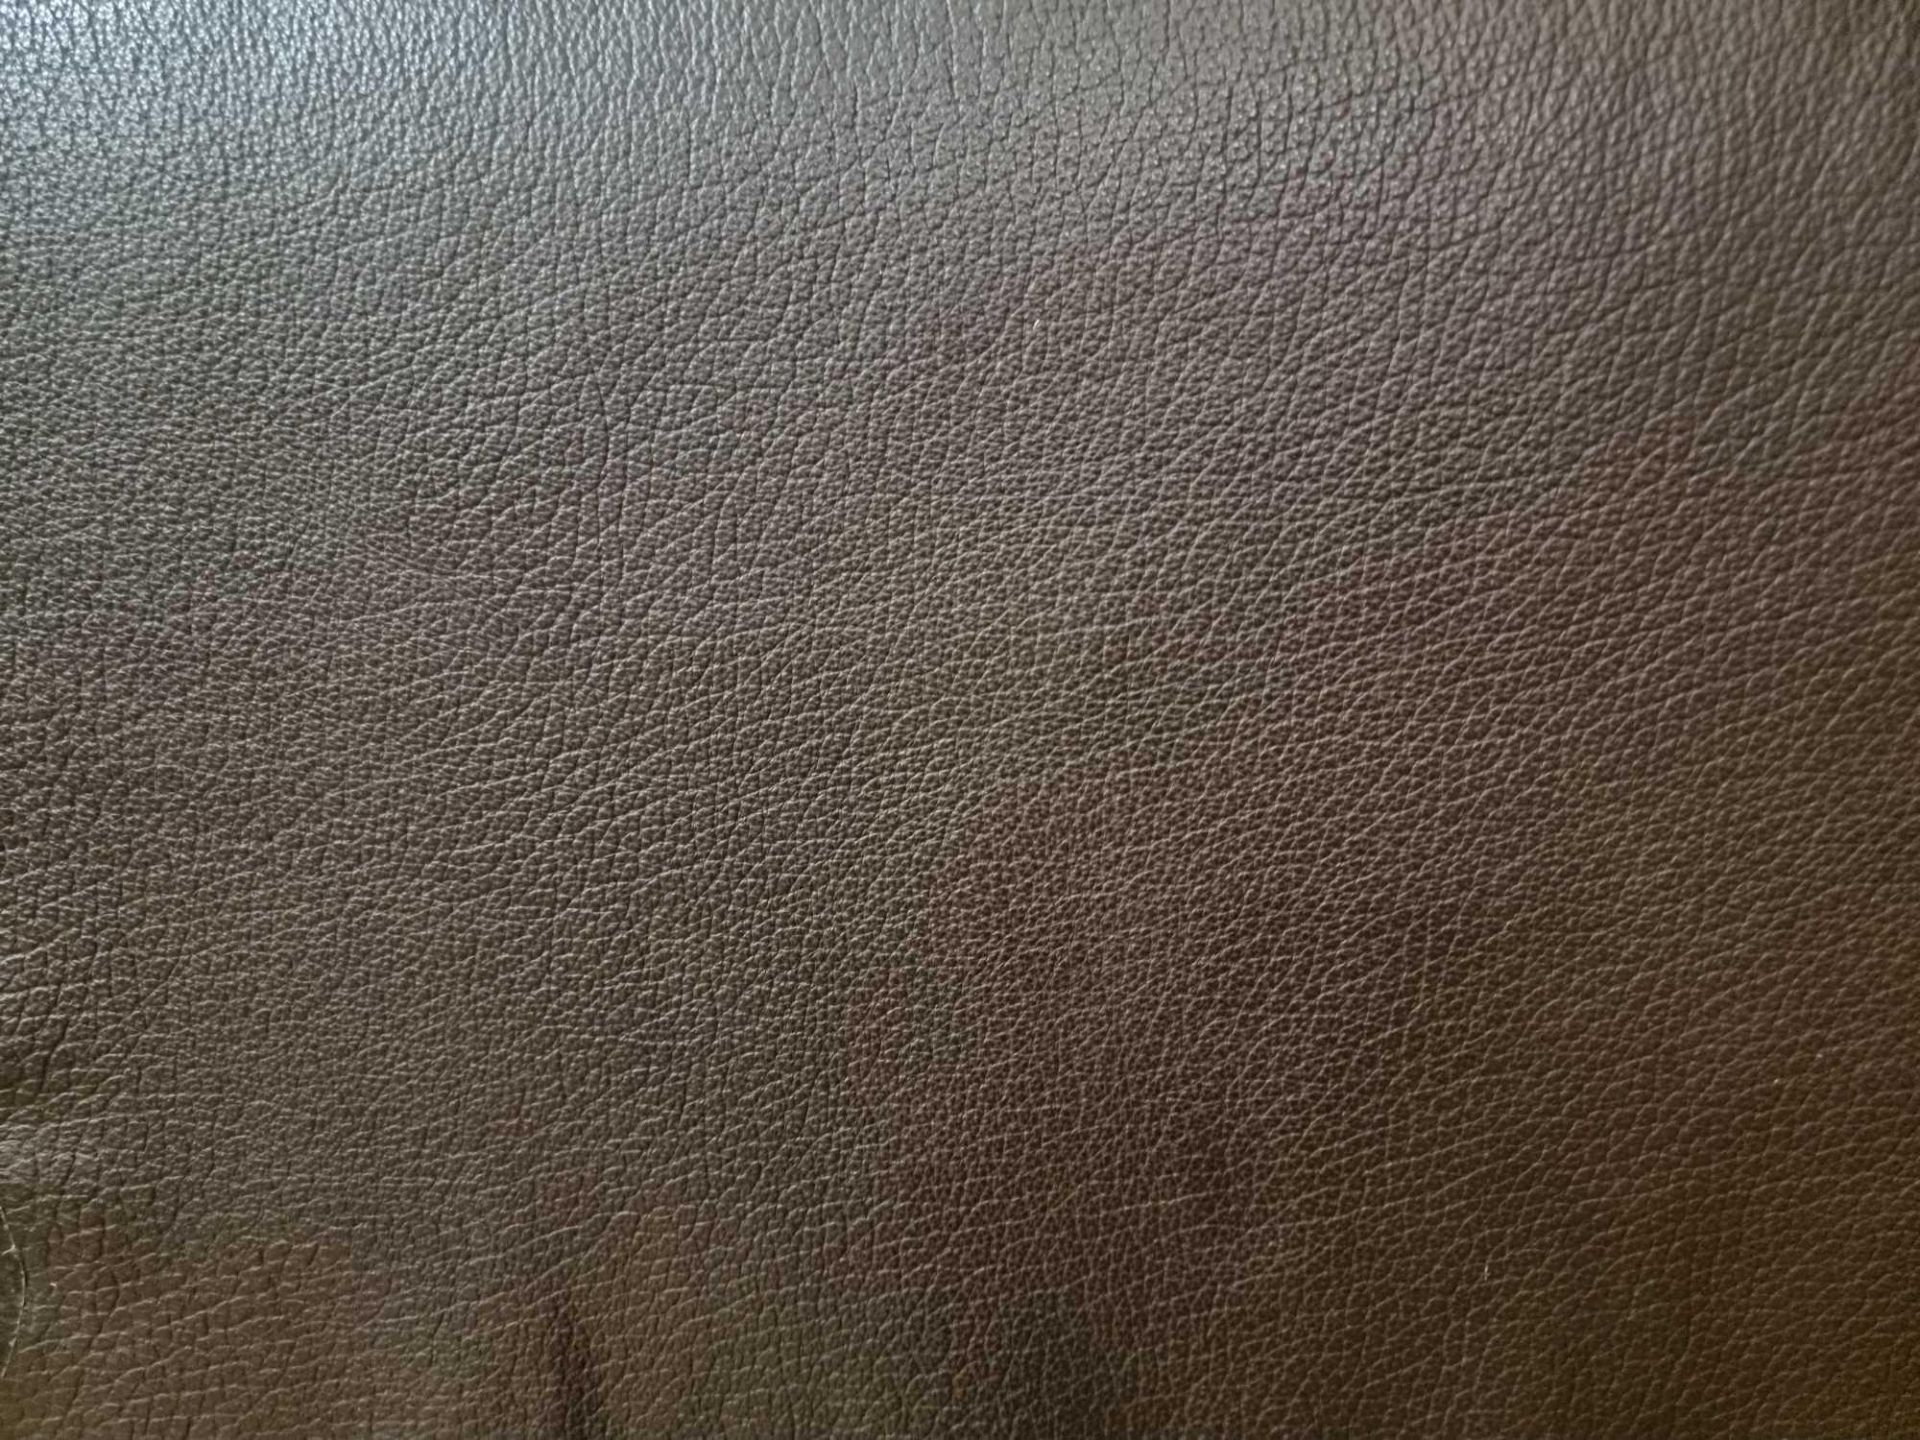 Mastrotto Hudson Chocolate Leather Hide approximately 4.2mÂ² 2.1 x 2cm - Image 2 of 3